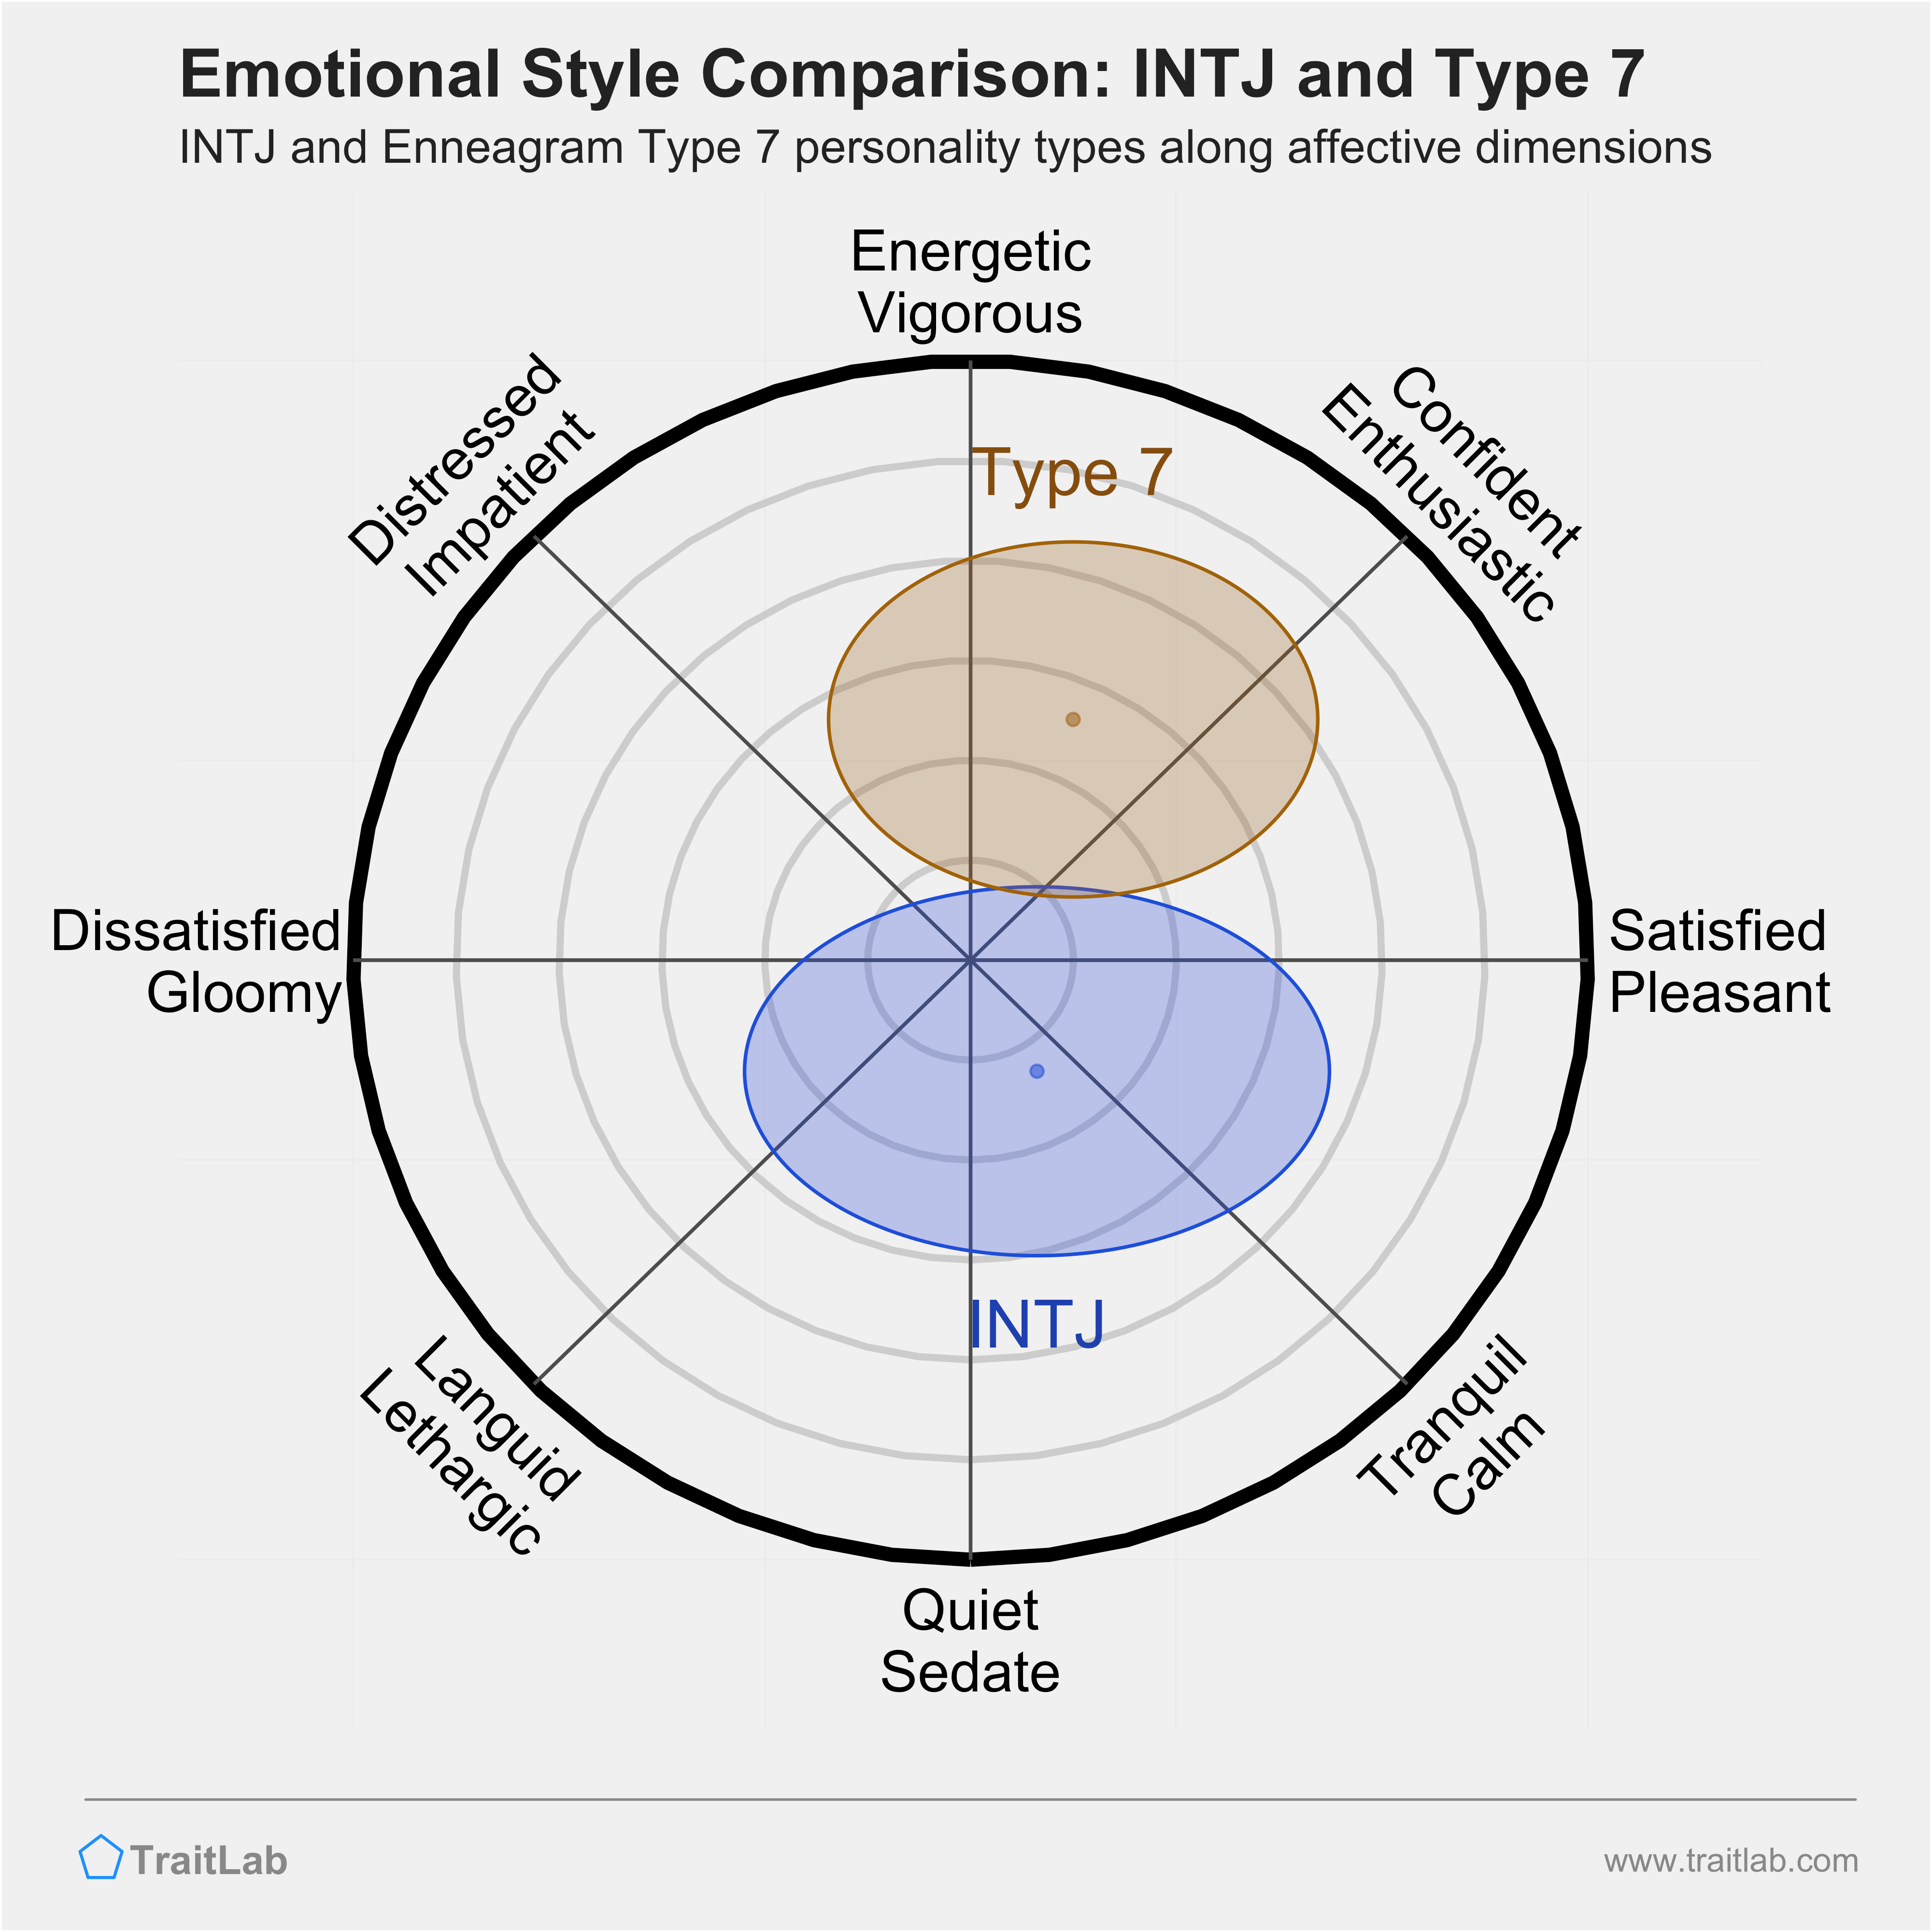 INTJ and Type 7 comparison across emotional (affective) dimensions